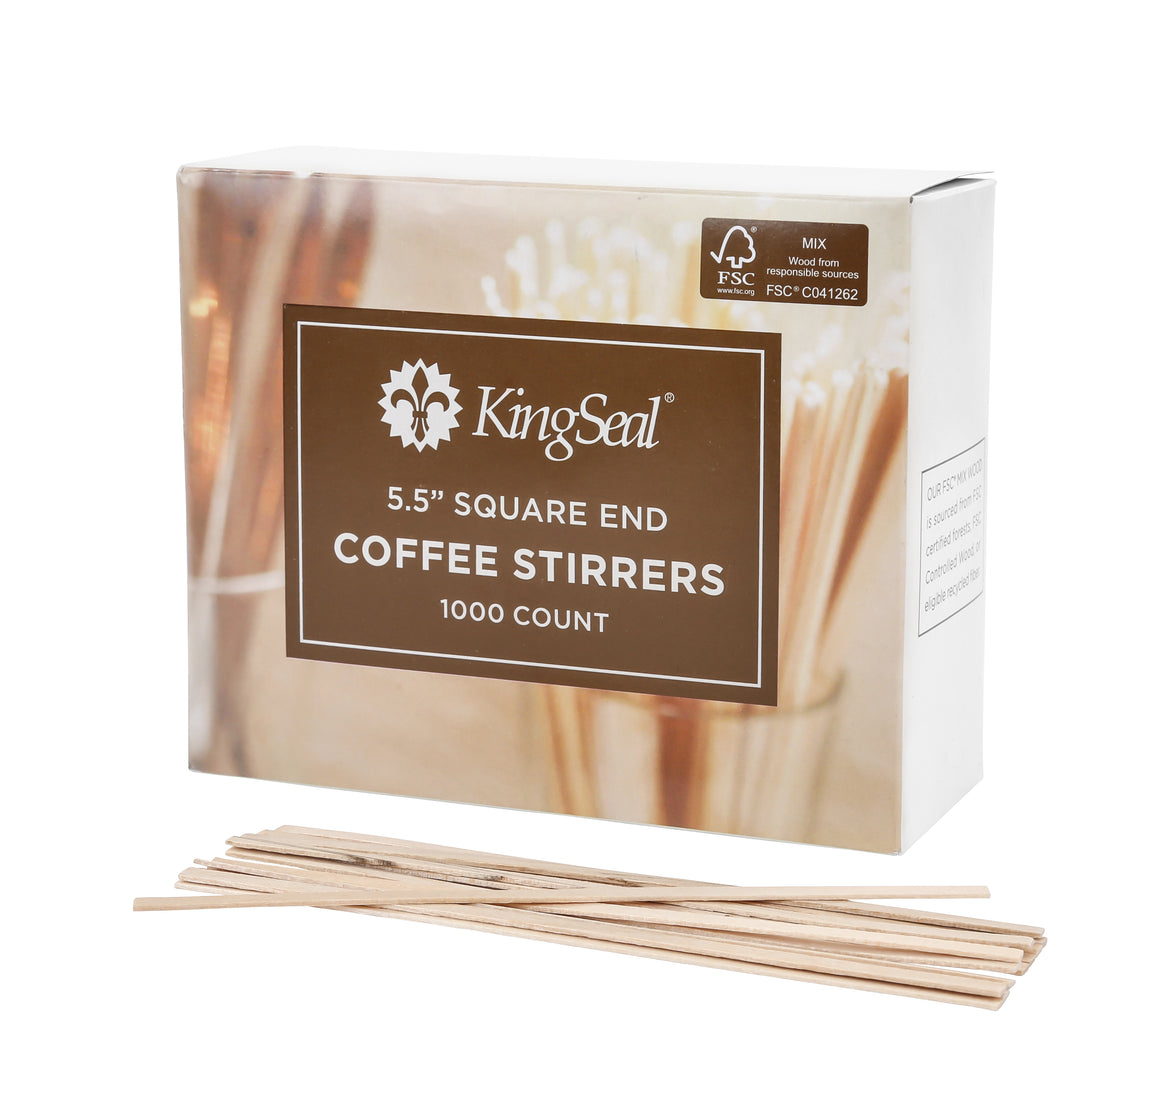 KingSeal FSC® C041262 Certified Natural Birch Wood Coffee Beverage Stirrers, Square End - 5.5 Inch